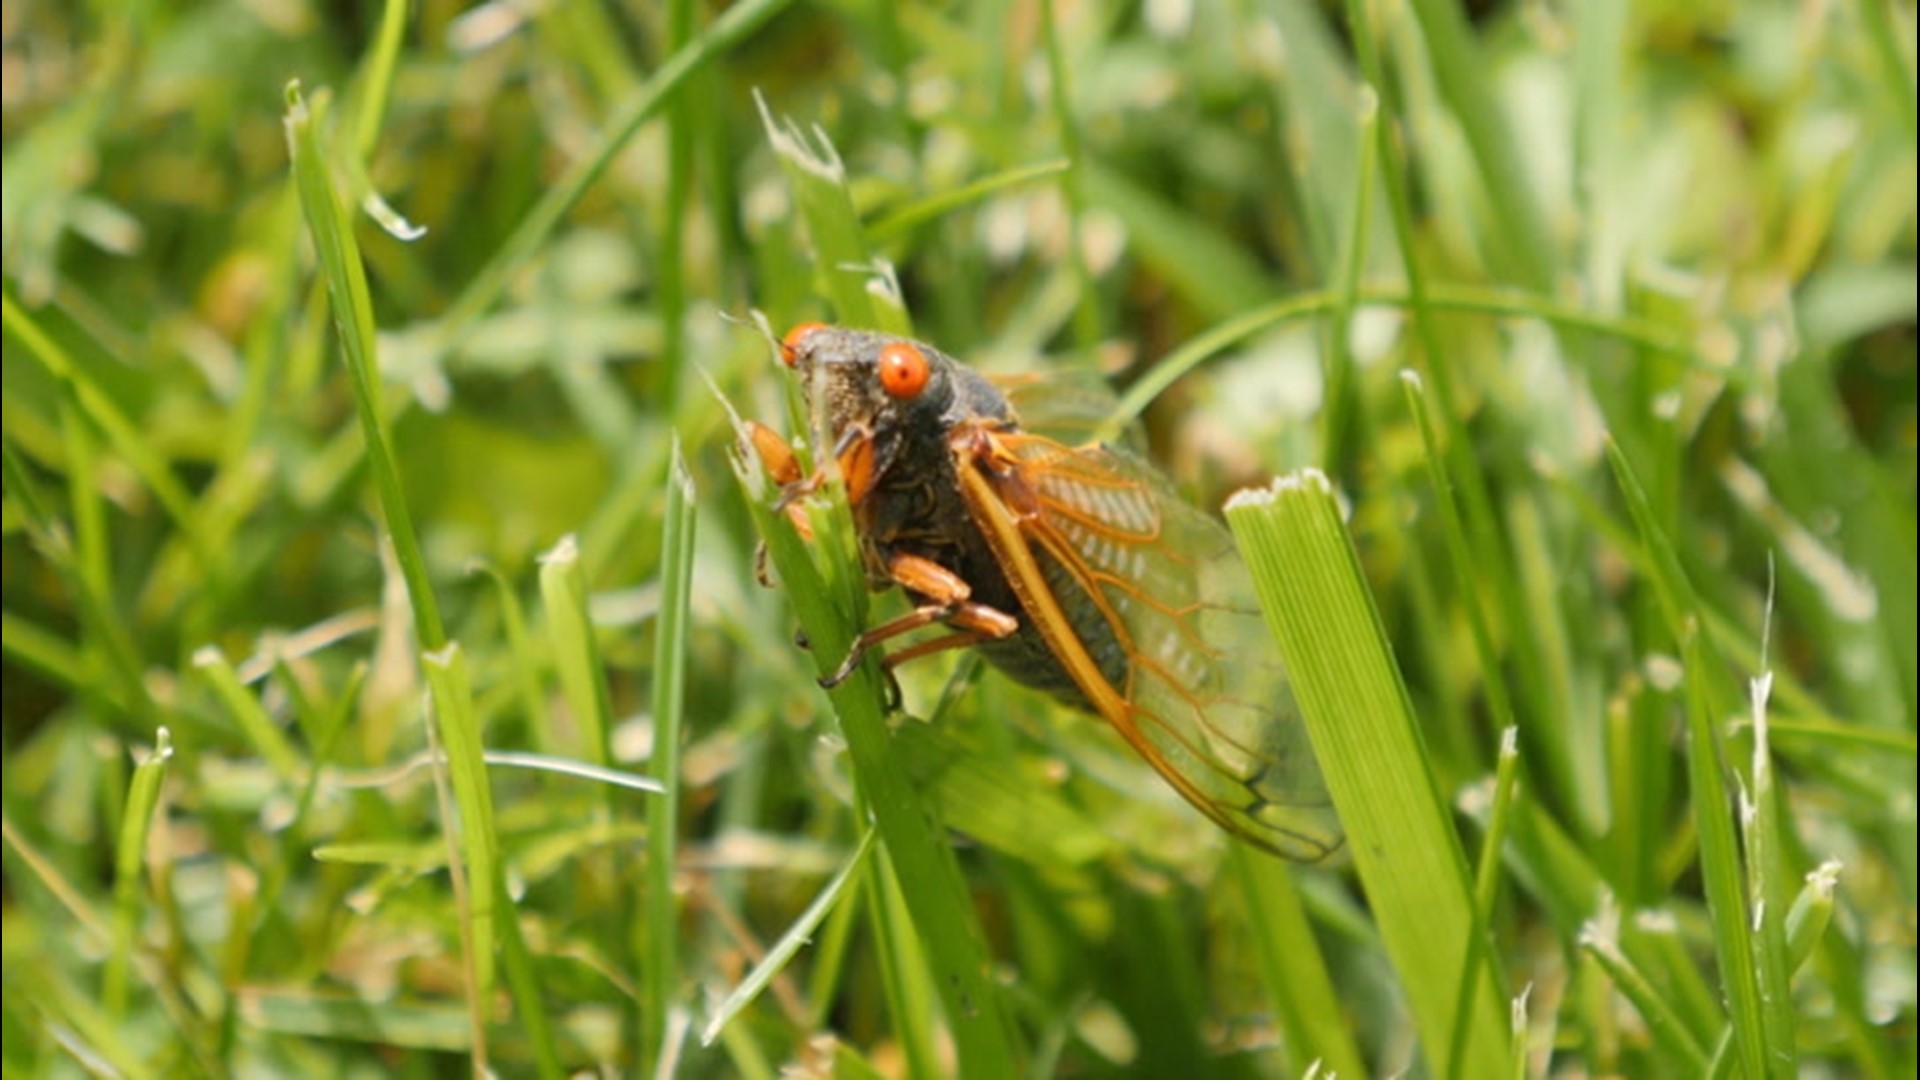 Following a 17-year period of underground development, periodical cicadas have emerged in parts of the Virginias and North Carolina.